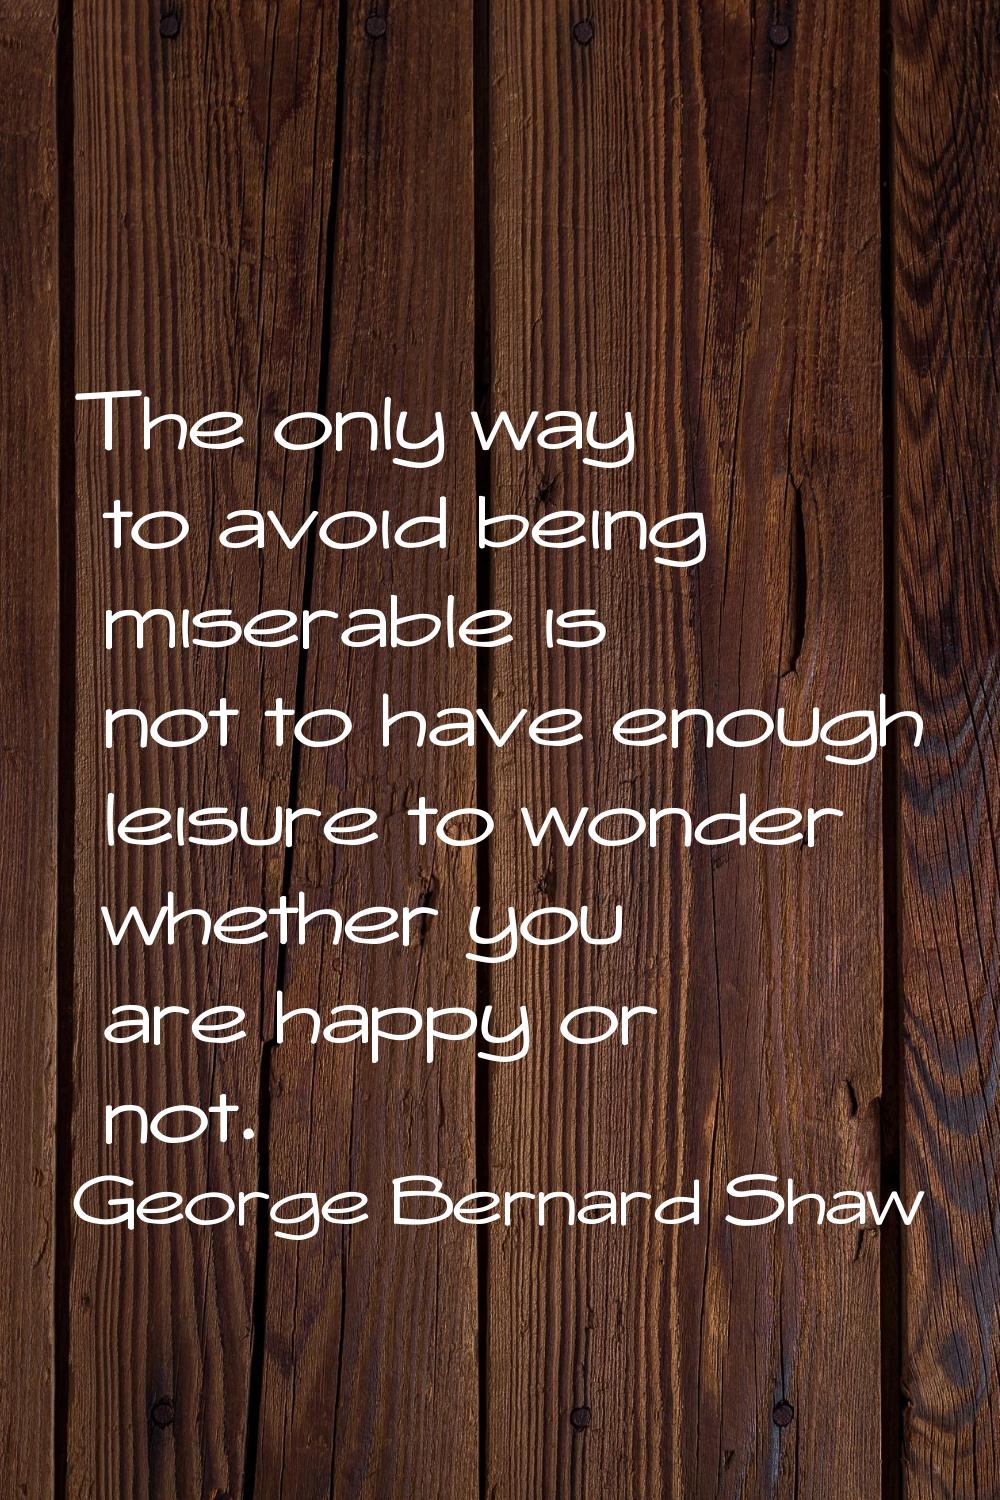 The only way to avoid being miserable is not to have enough leisure to wonder whether you are happy